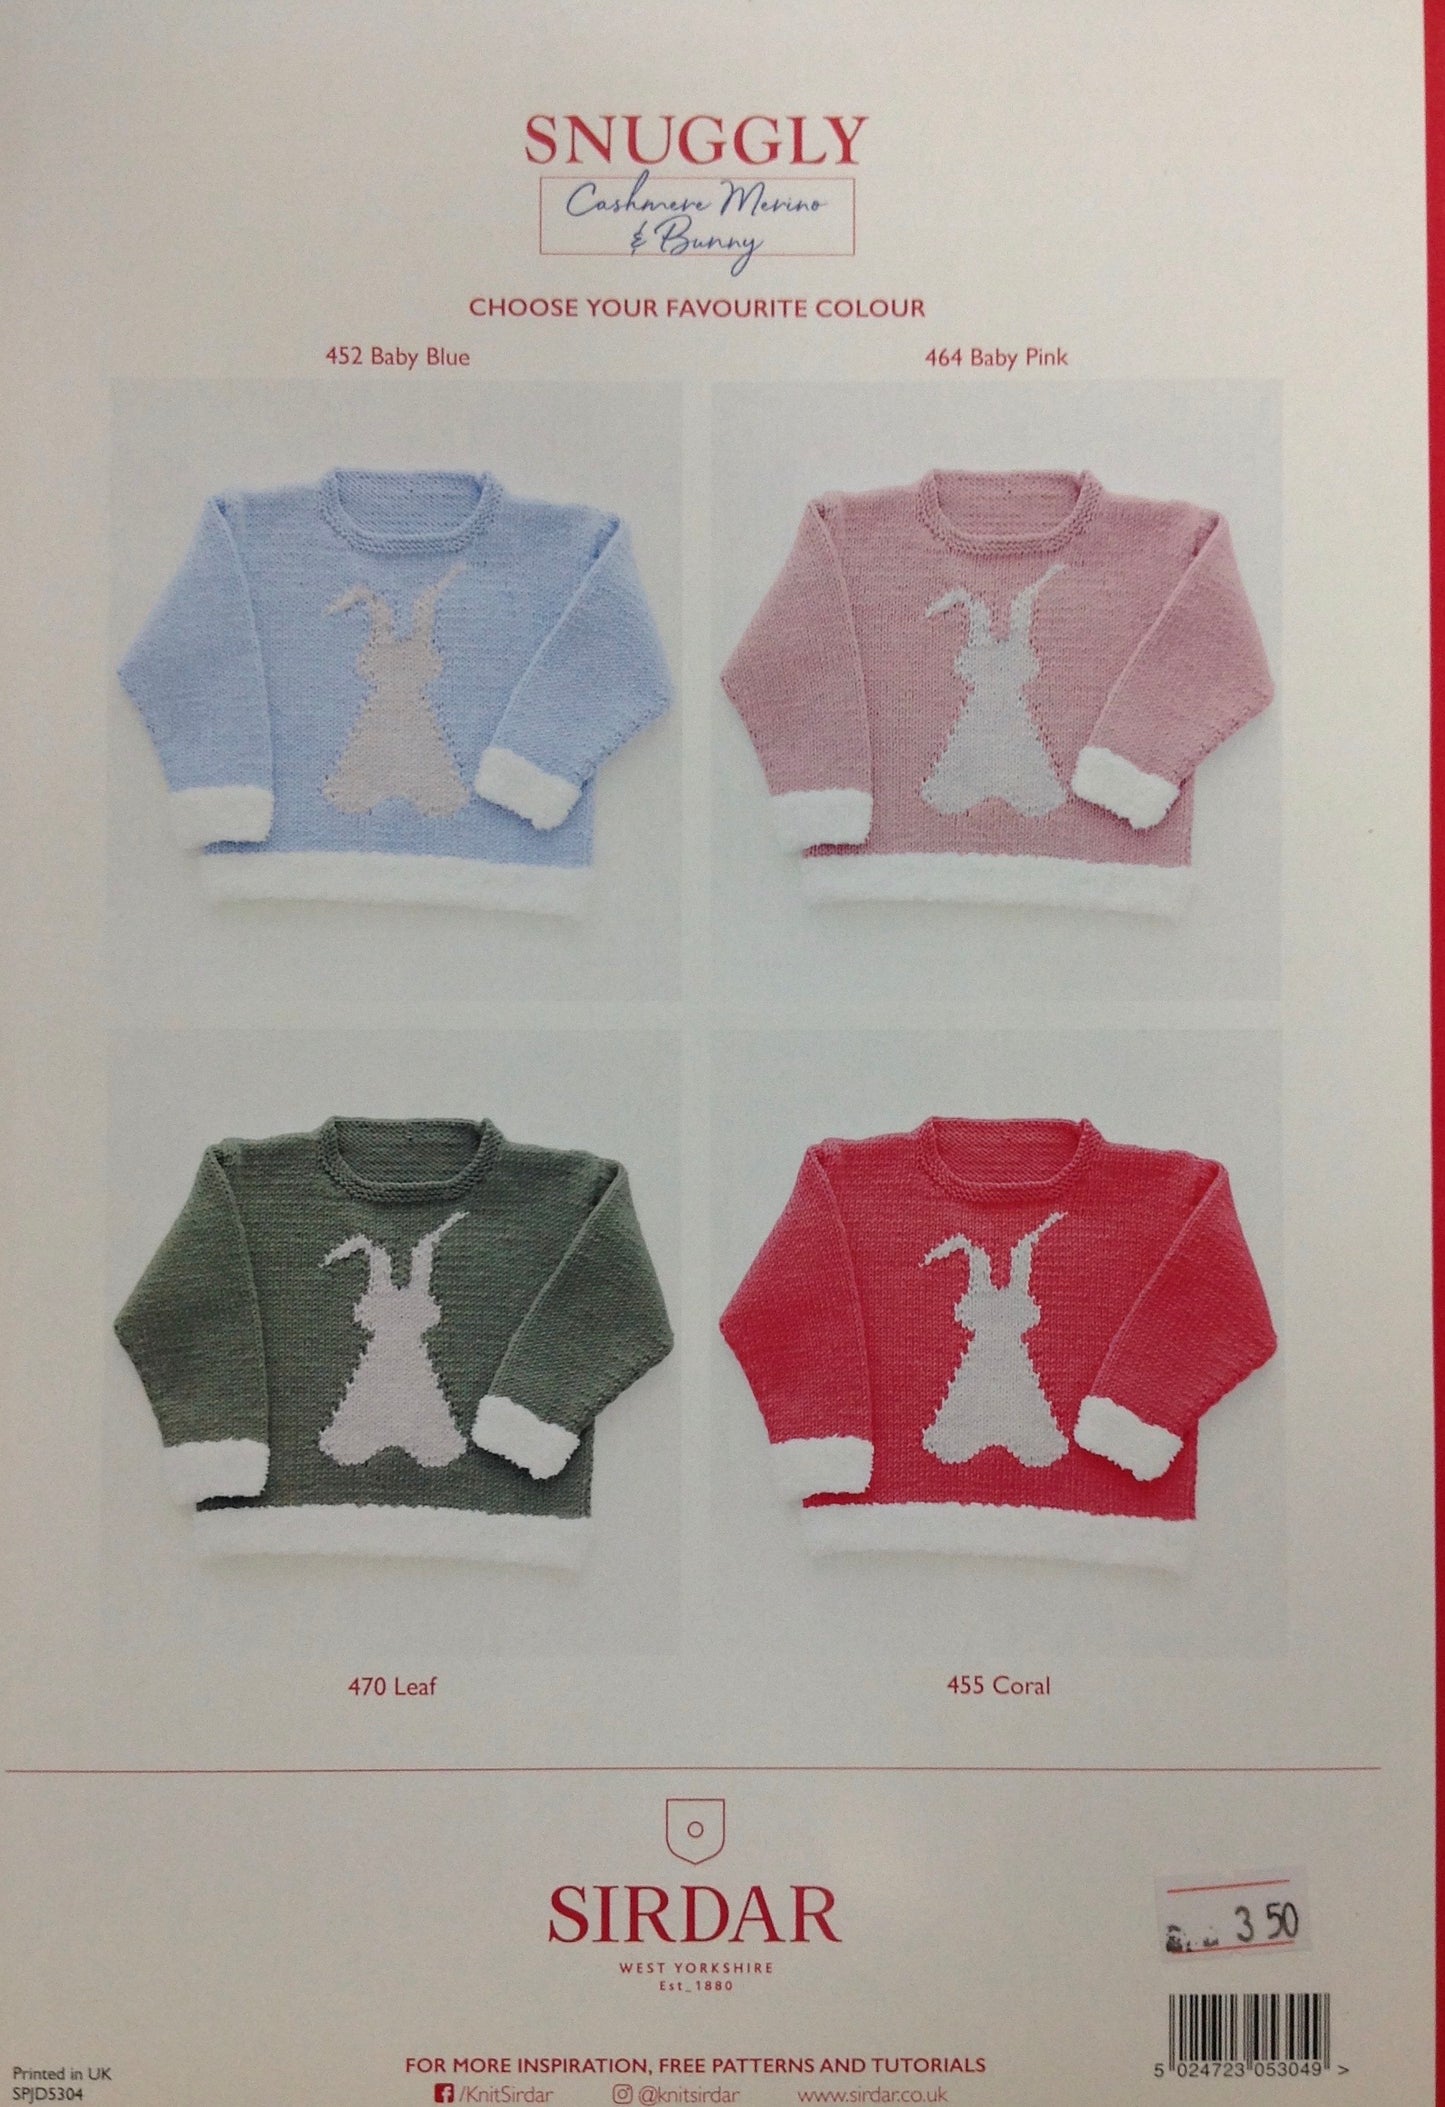 5304 Sirdar Snuggly Cashmere Merino Bunny Baby Hooded Sweater Knitting Pattern